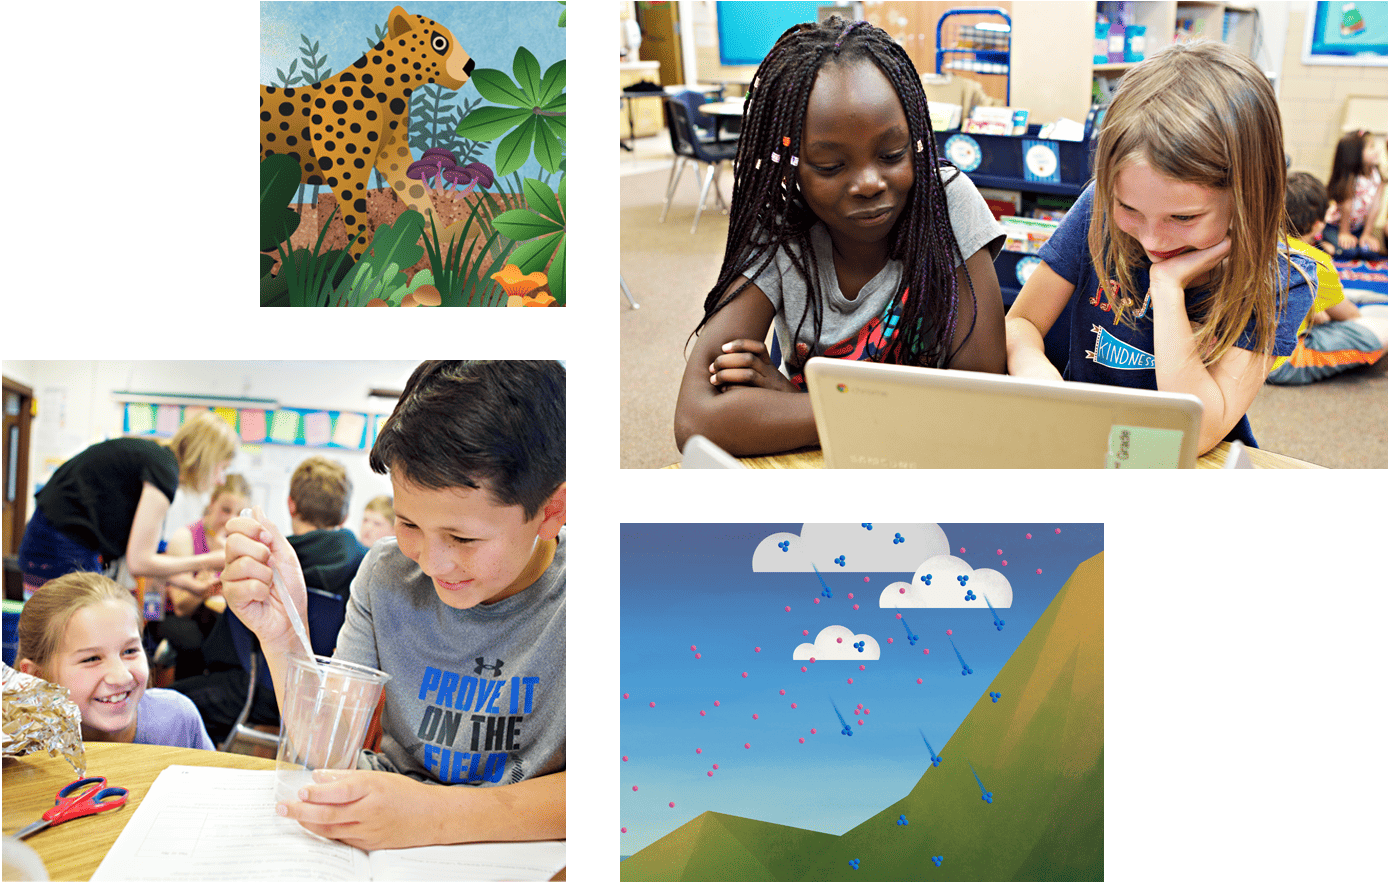 Collage of four images: a jungle illustration with a giraffe, students using computers, a boy studying with classmates, and an animated hillside with kites flying.